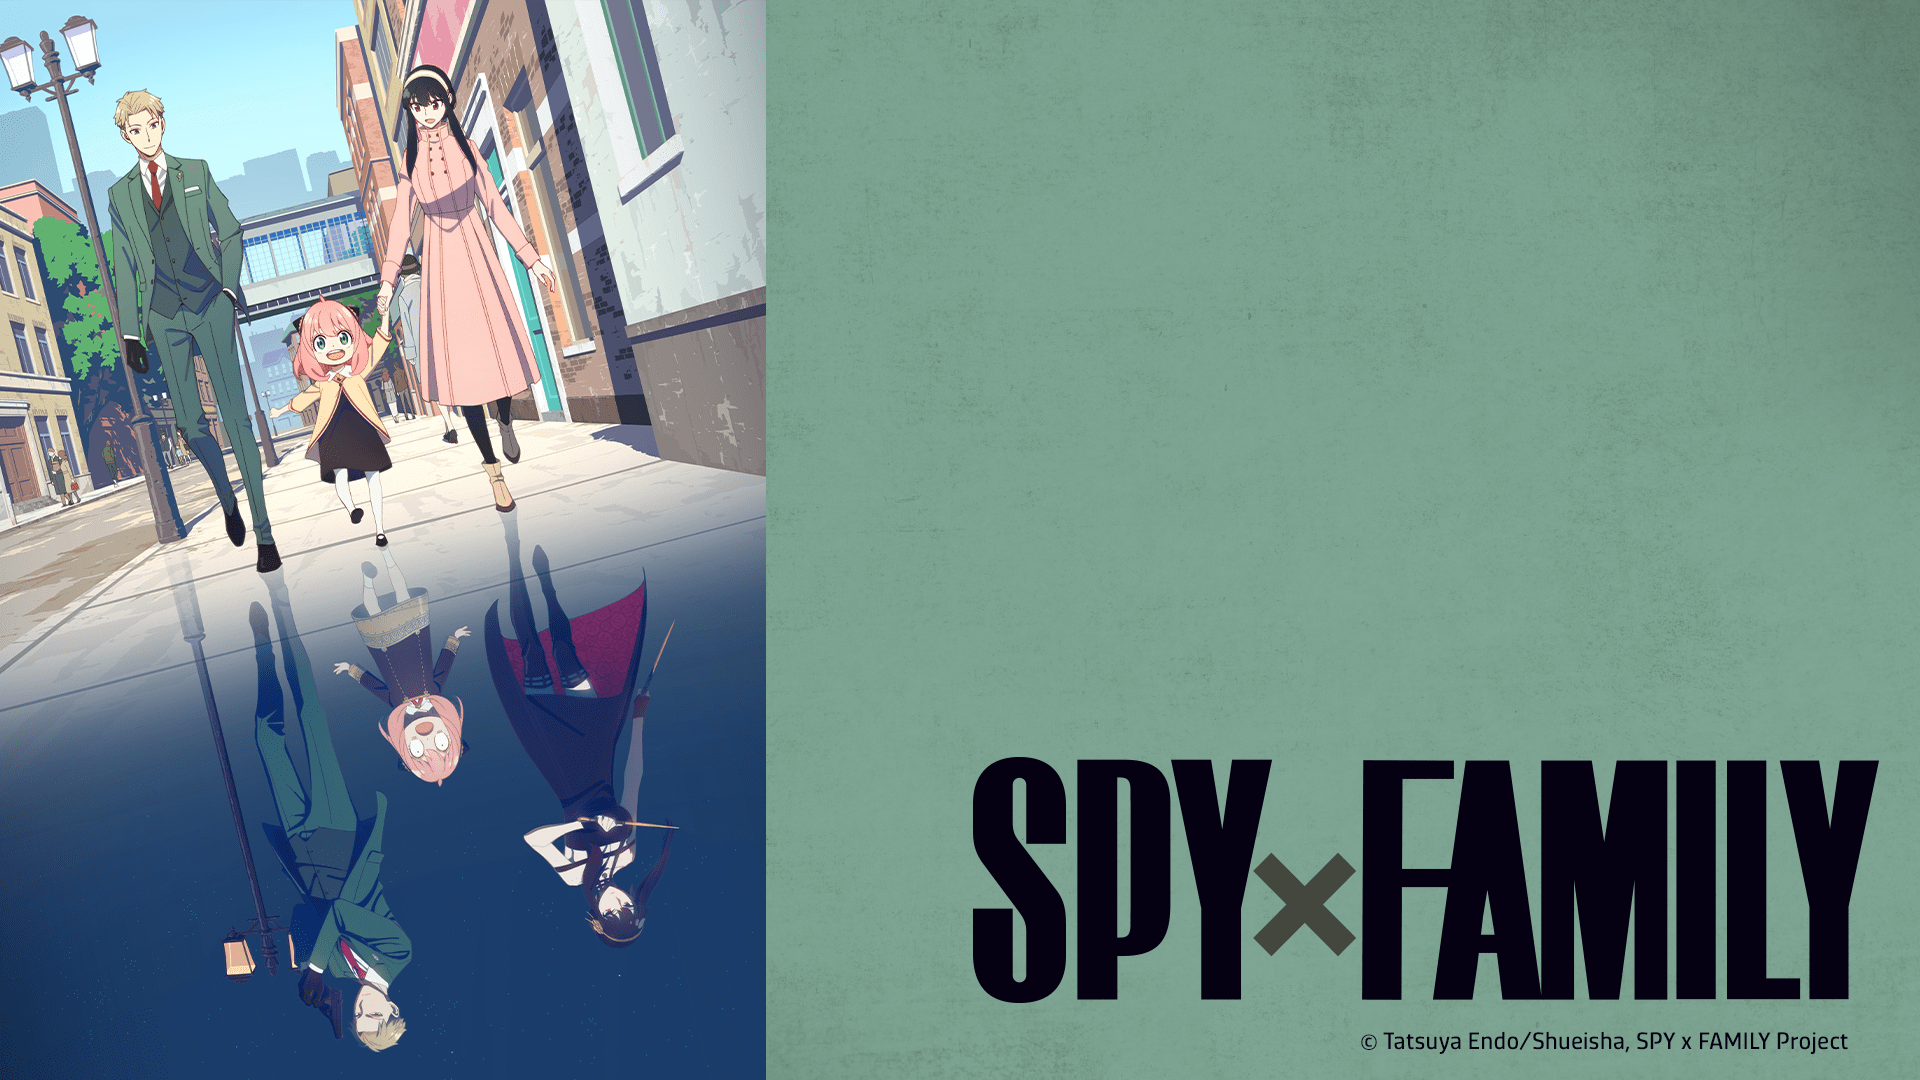 Key art for the initial episodes of 'Spy x Family.' It features Twilight, Anya, and Yor walking down the street. Their puddle shows a reflection of them revealing their true identities.